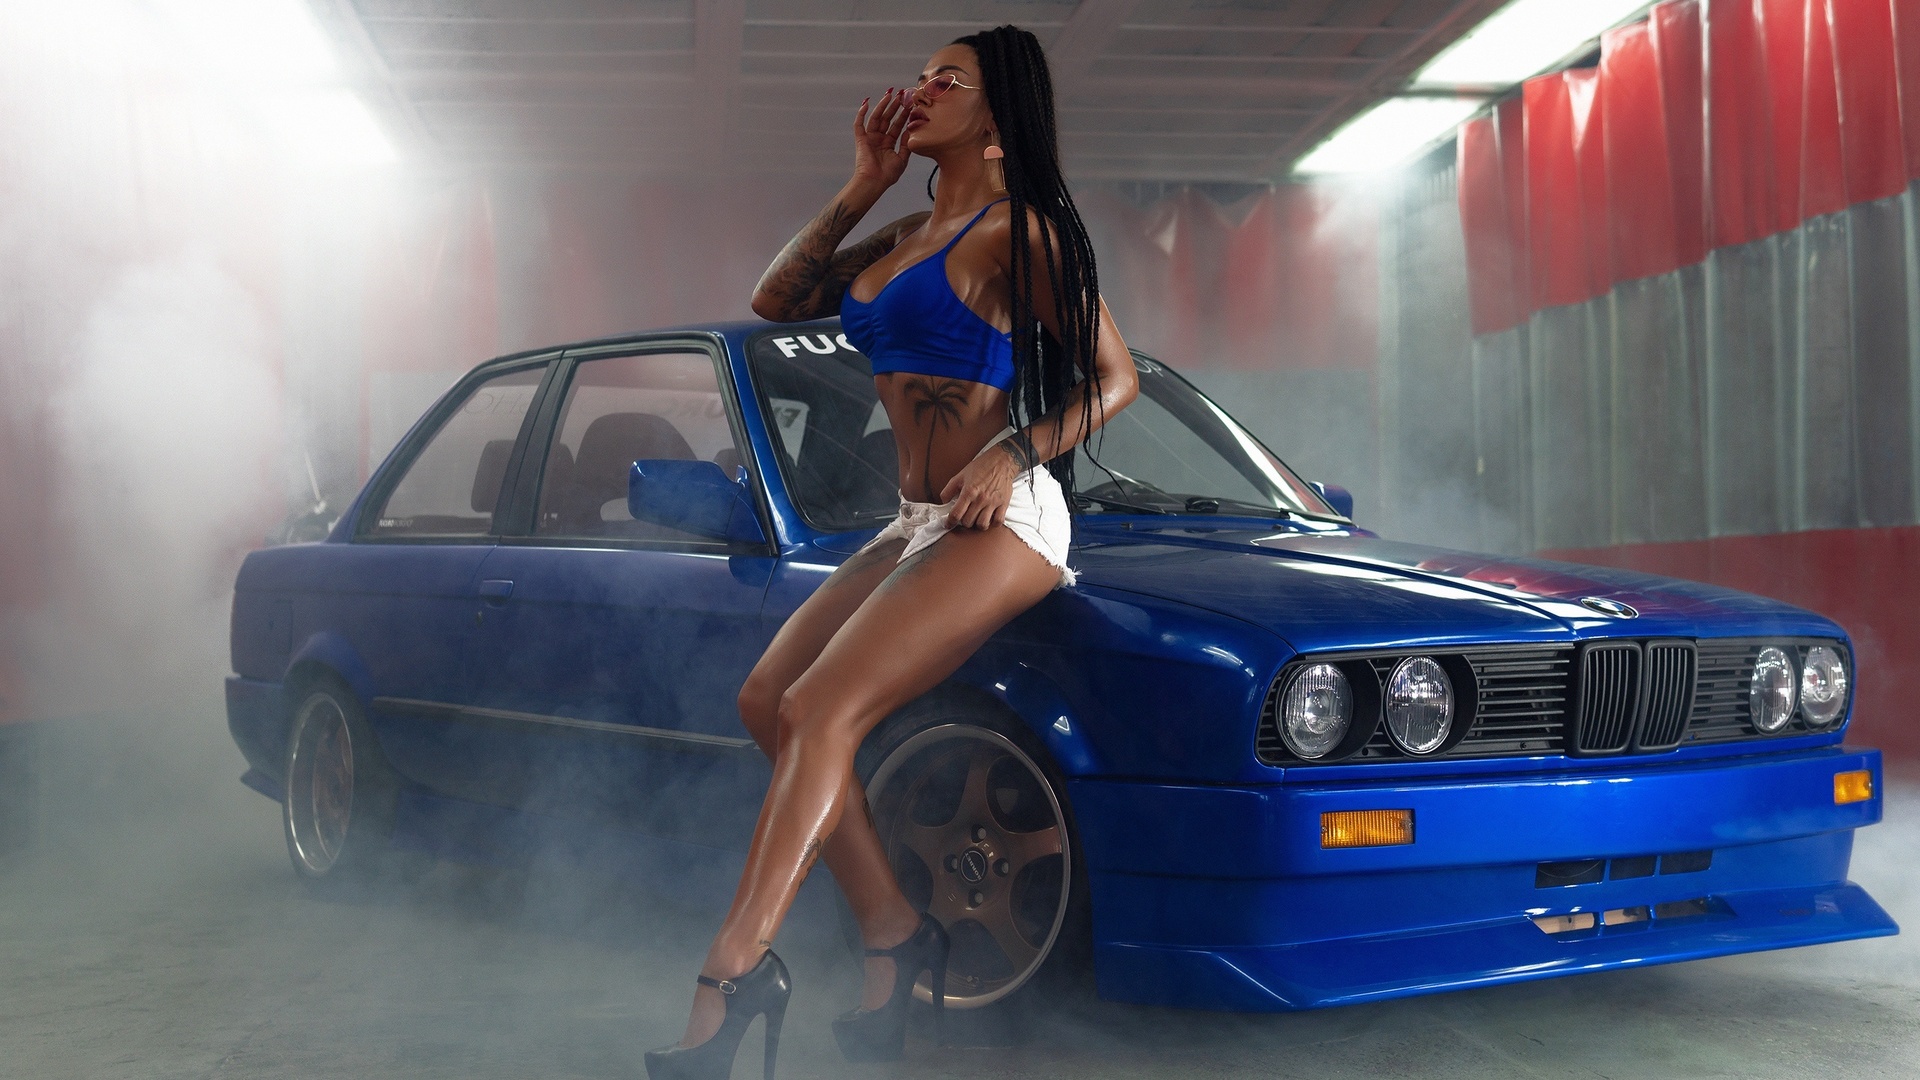 women, alex bazilev, smoke, tanned, jean shorts, high heels, long hair, belly, tattoo, women with cars, women with glasses